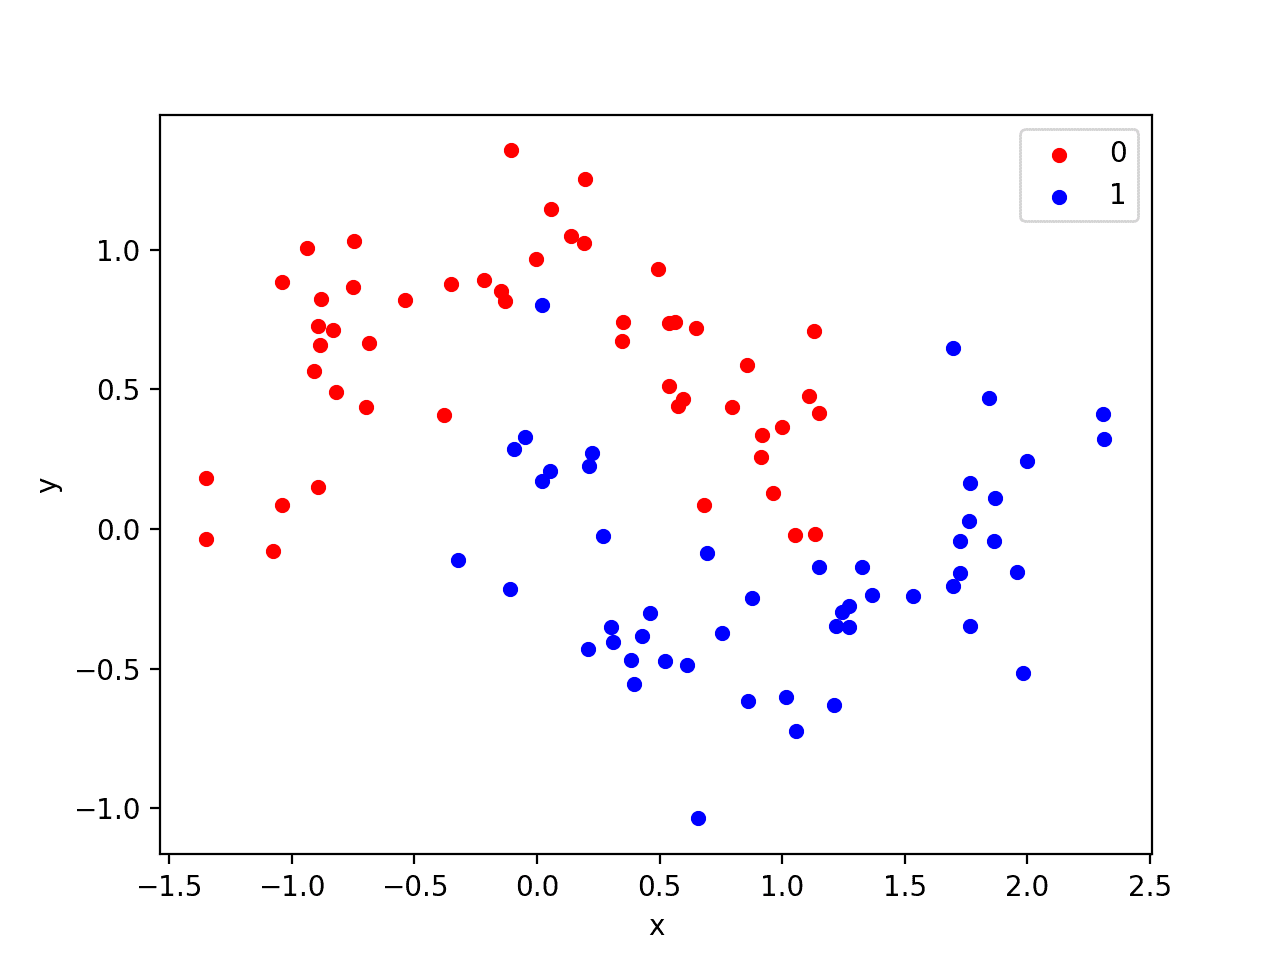 How to Reduce Overfitting Using Weight Constraints in Keras